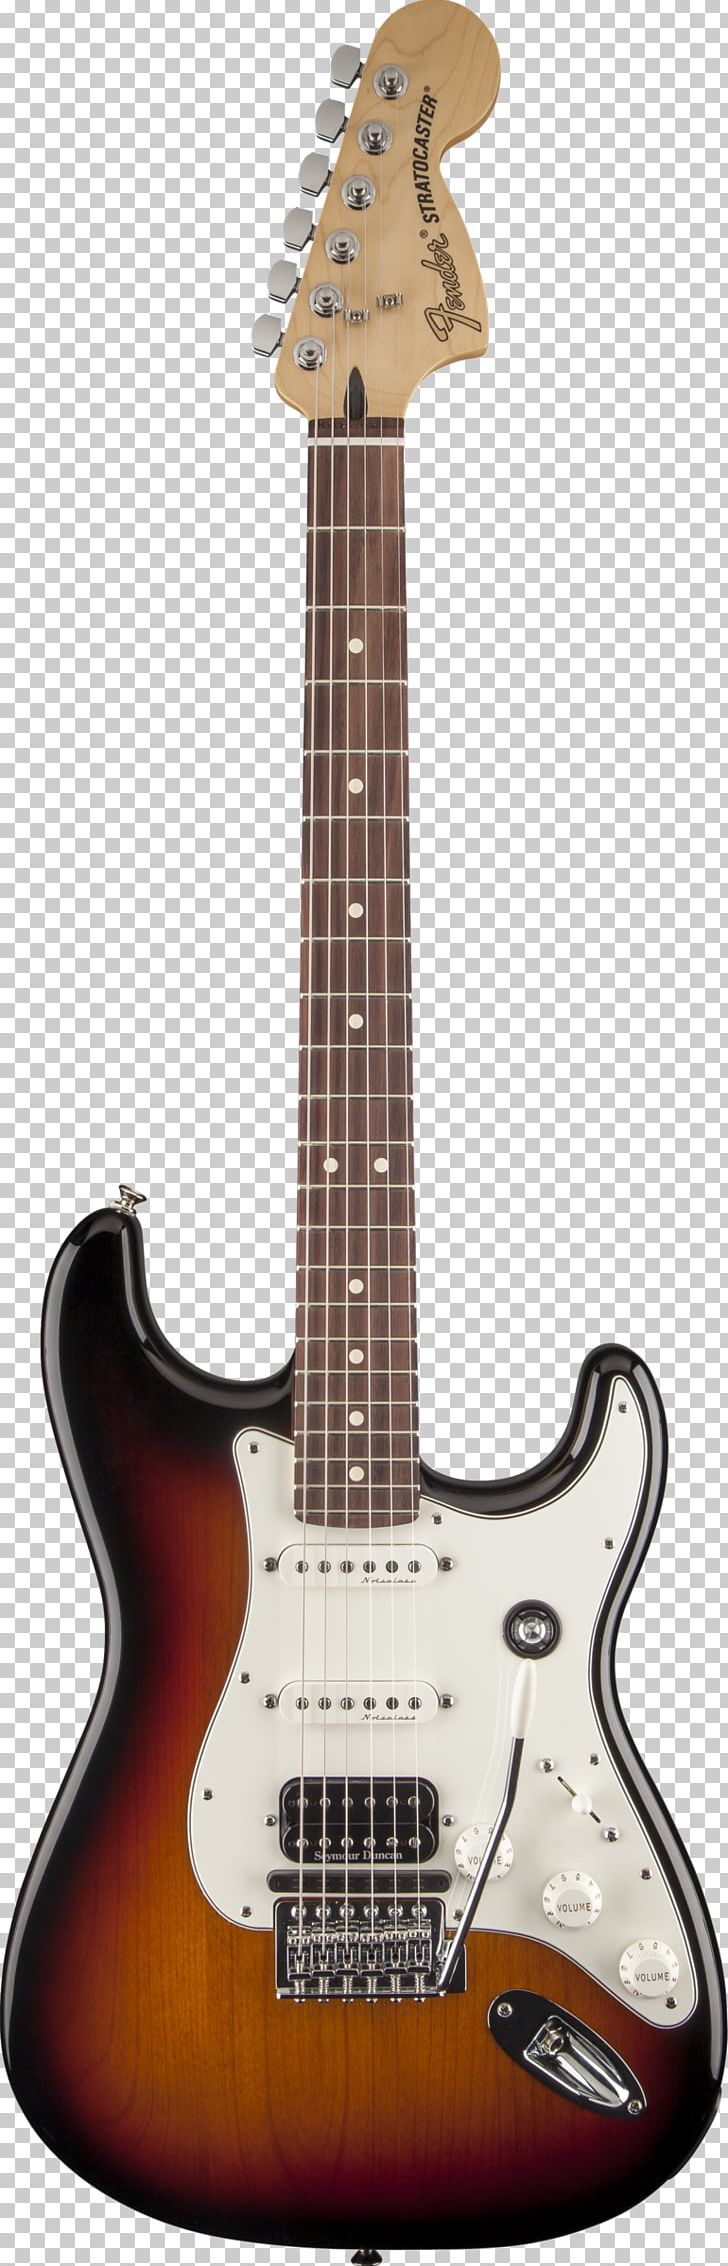 Fender Stratocaster Fender Musical Instruments Corporation Squier Electric Guitar Fender American Deluxe Series PNG, Clipart, Acoustic Electric Guitar, Acoustic Guitar, Bass Guitar, Floyd Rose, Guitar Free PNG Download